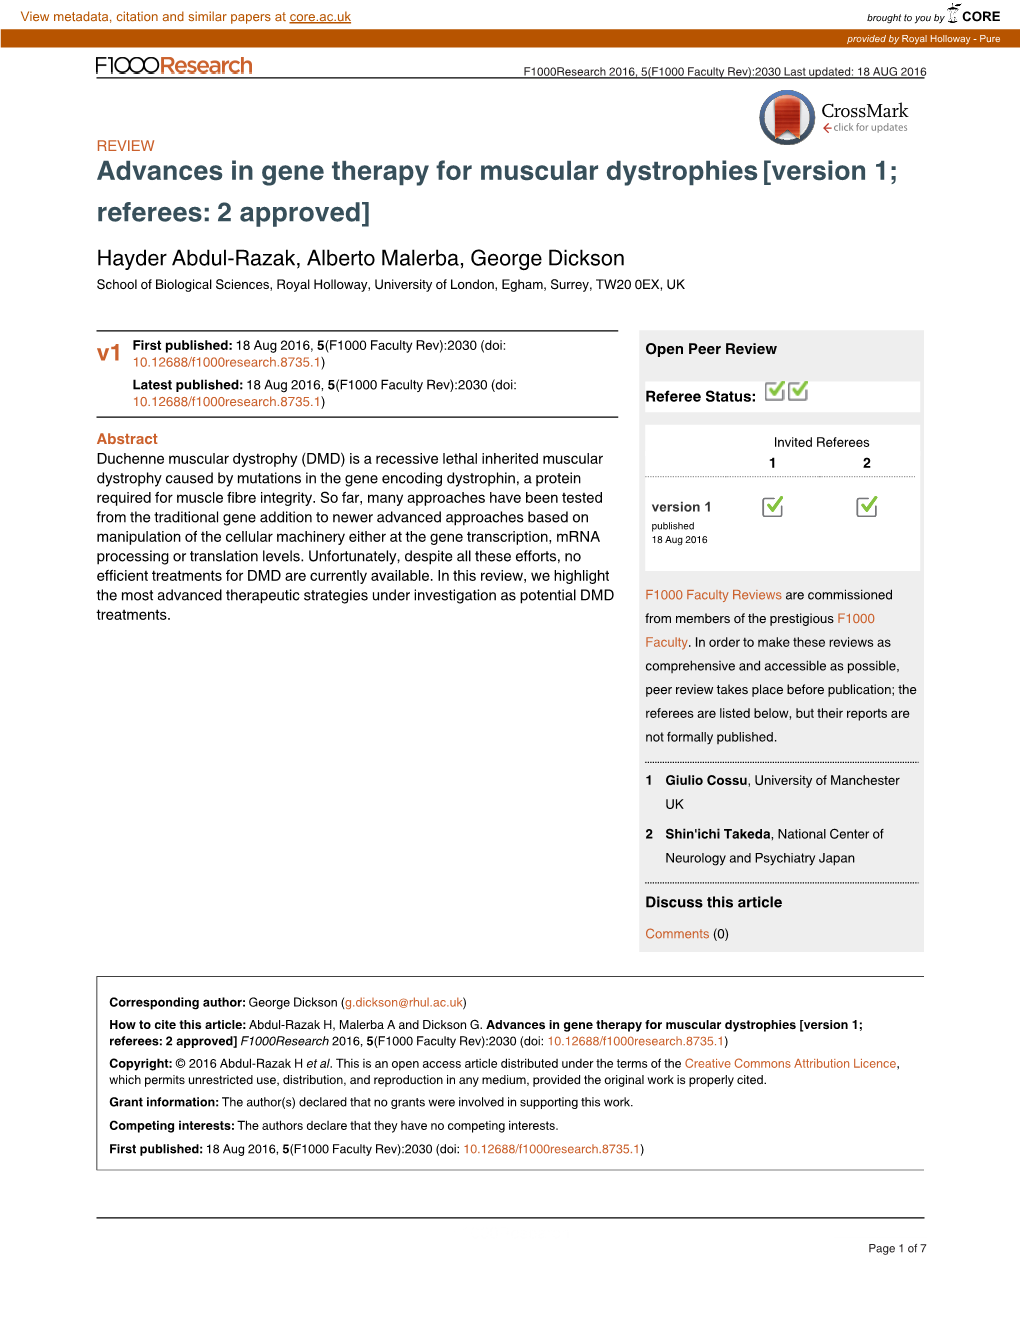 Advances in Gene Therapy for Muscular Dystrophies[Version 1